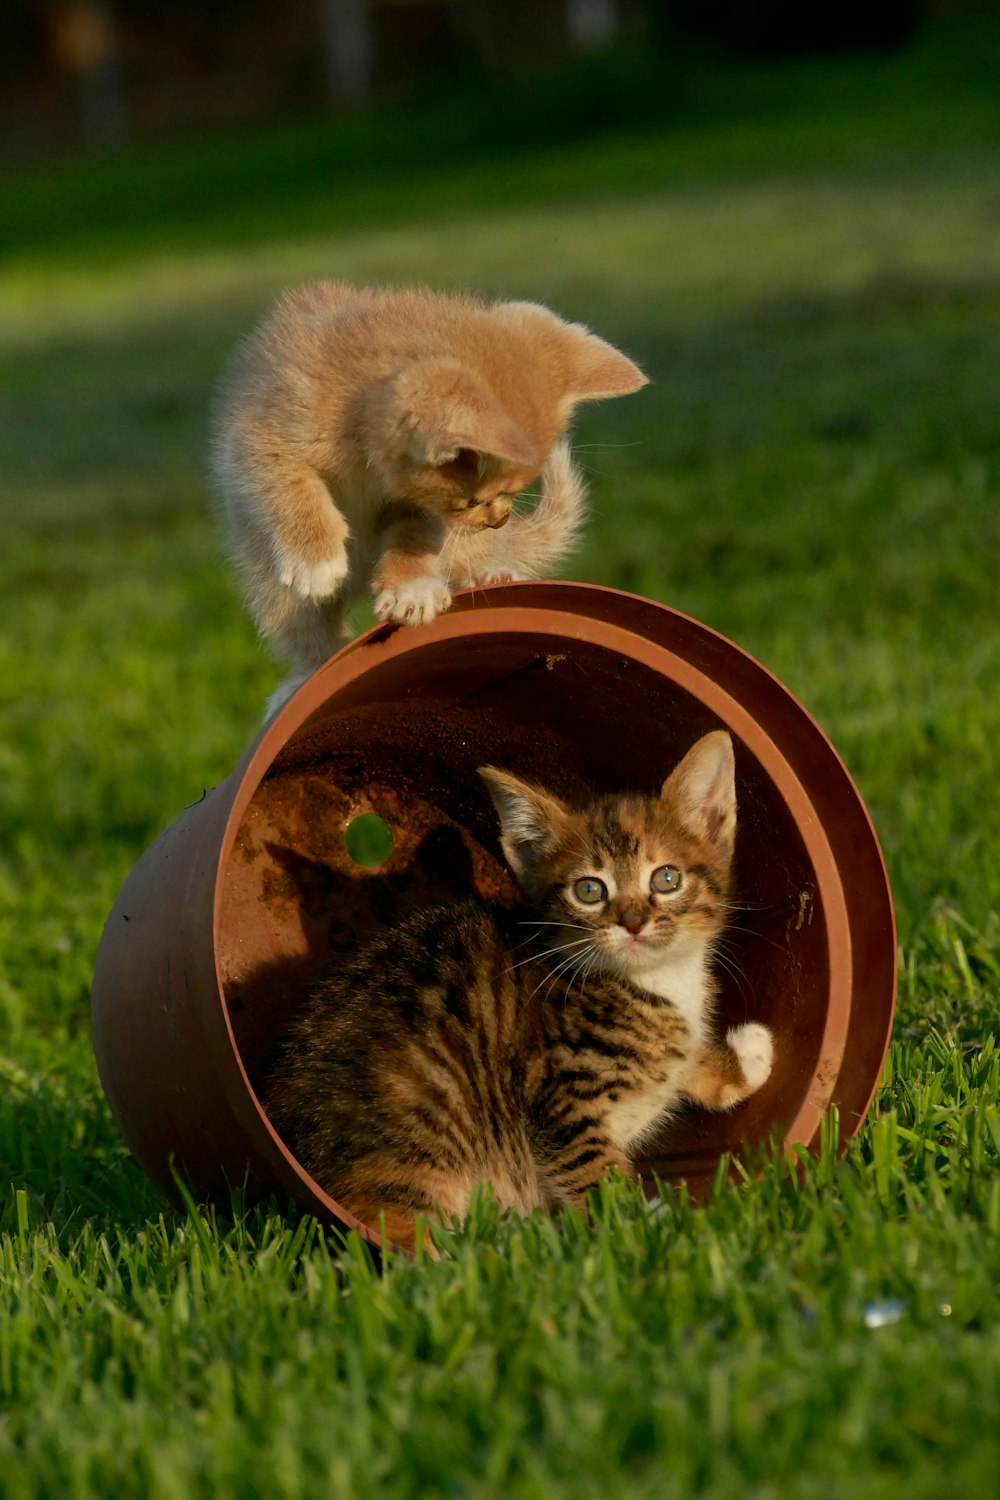 two cats in a round object